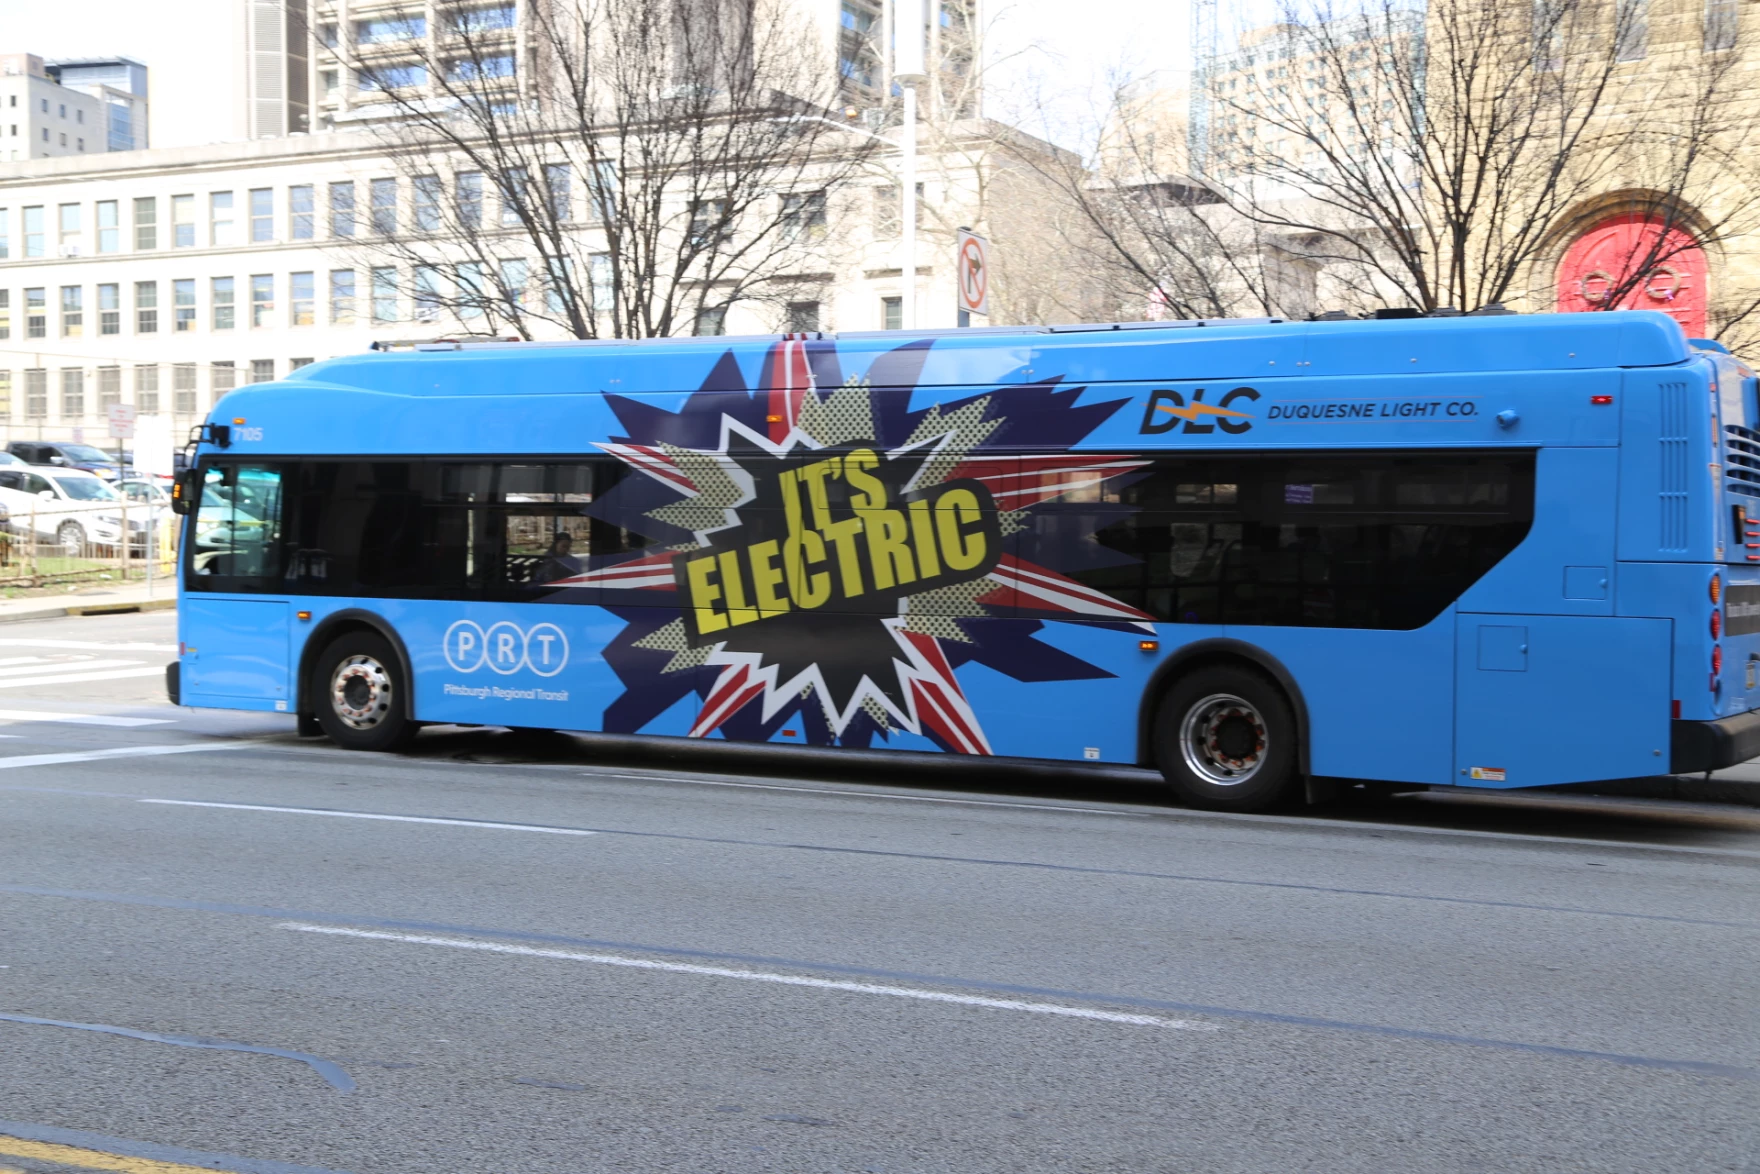 A blue city bus with words in yellow that say "It's Electric."